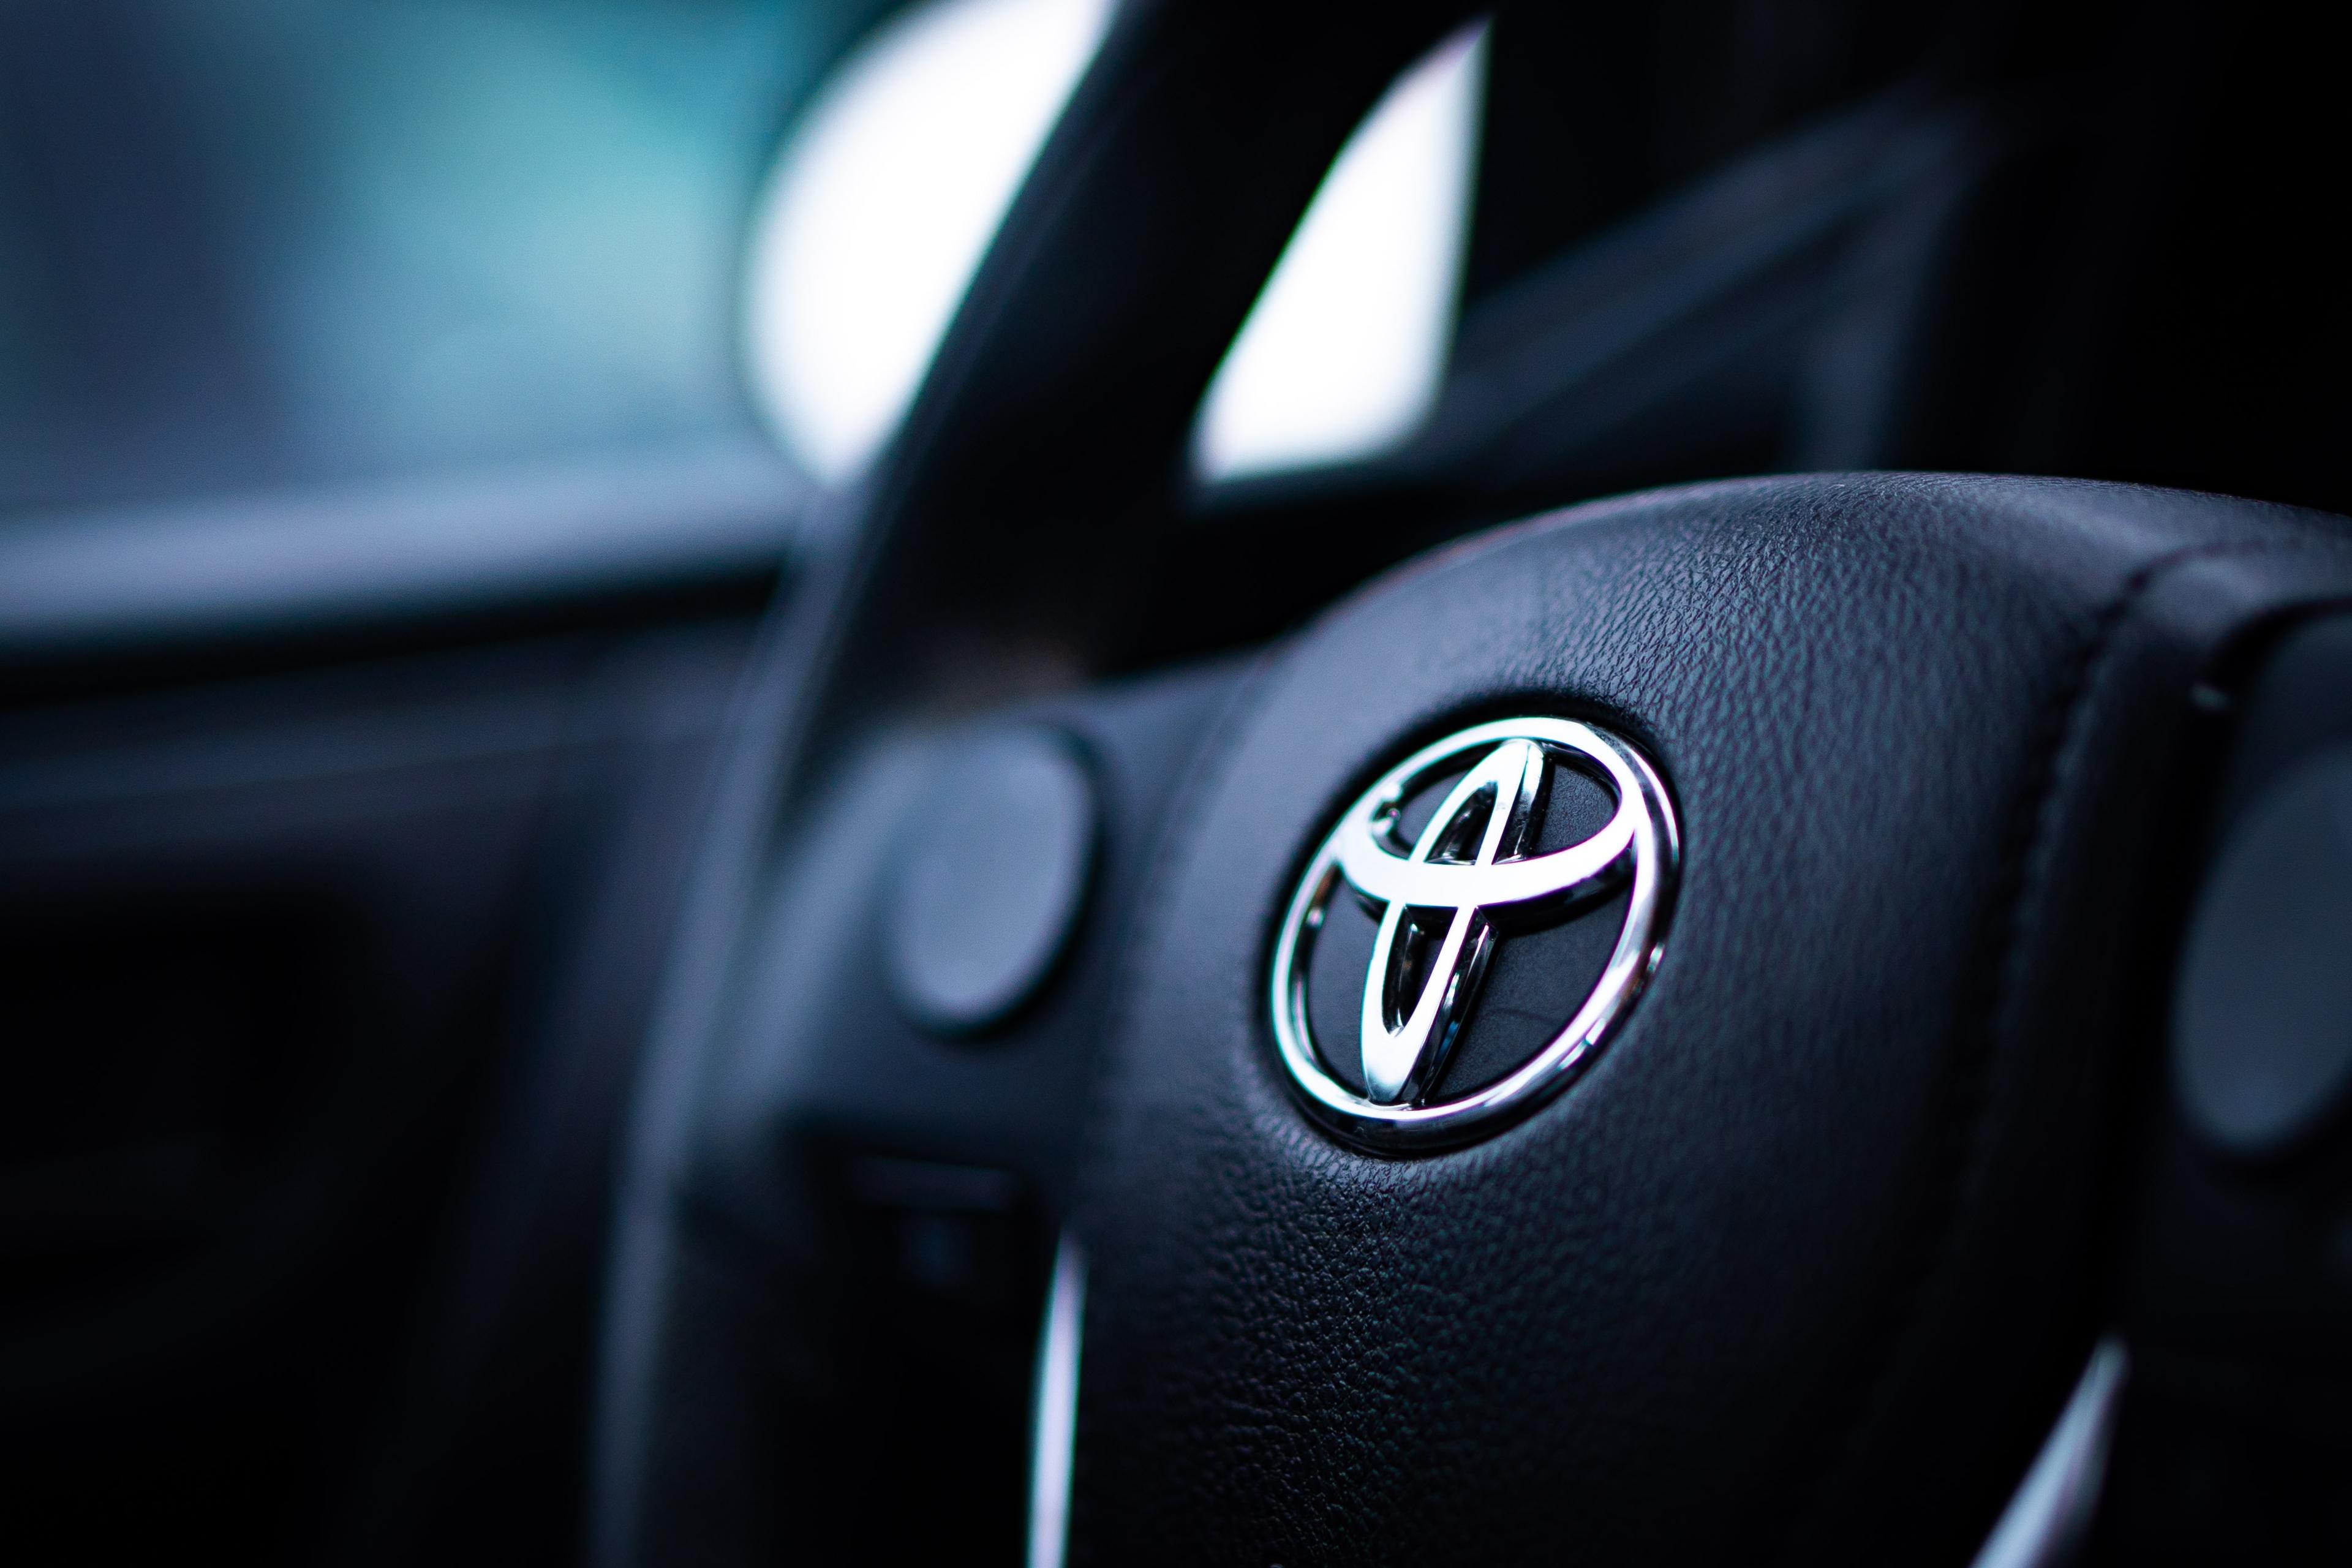 Toyota is known to be a long-lasting and reliable brand